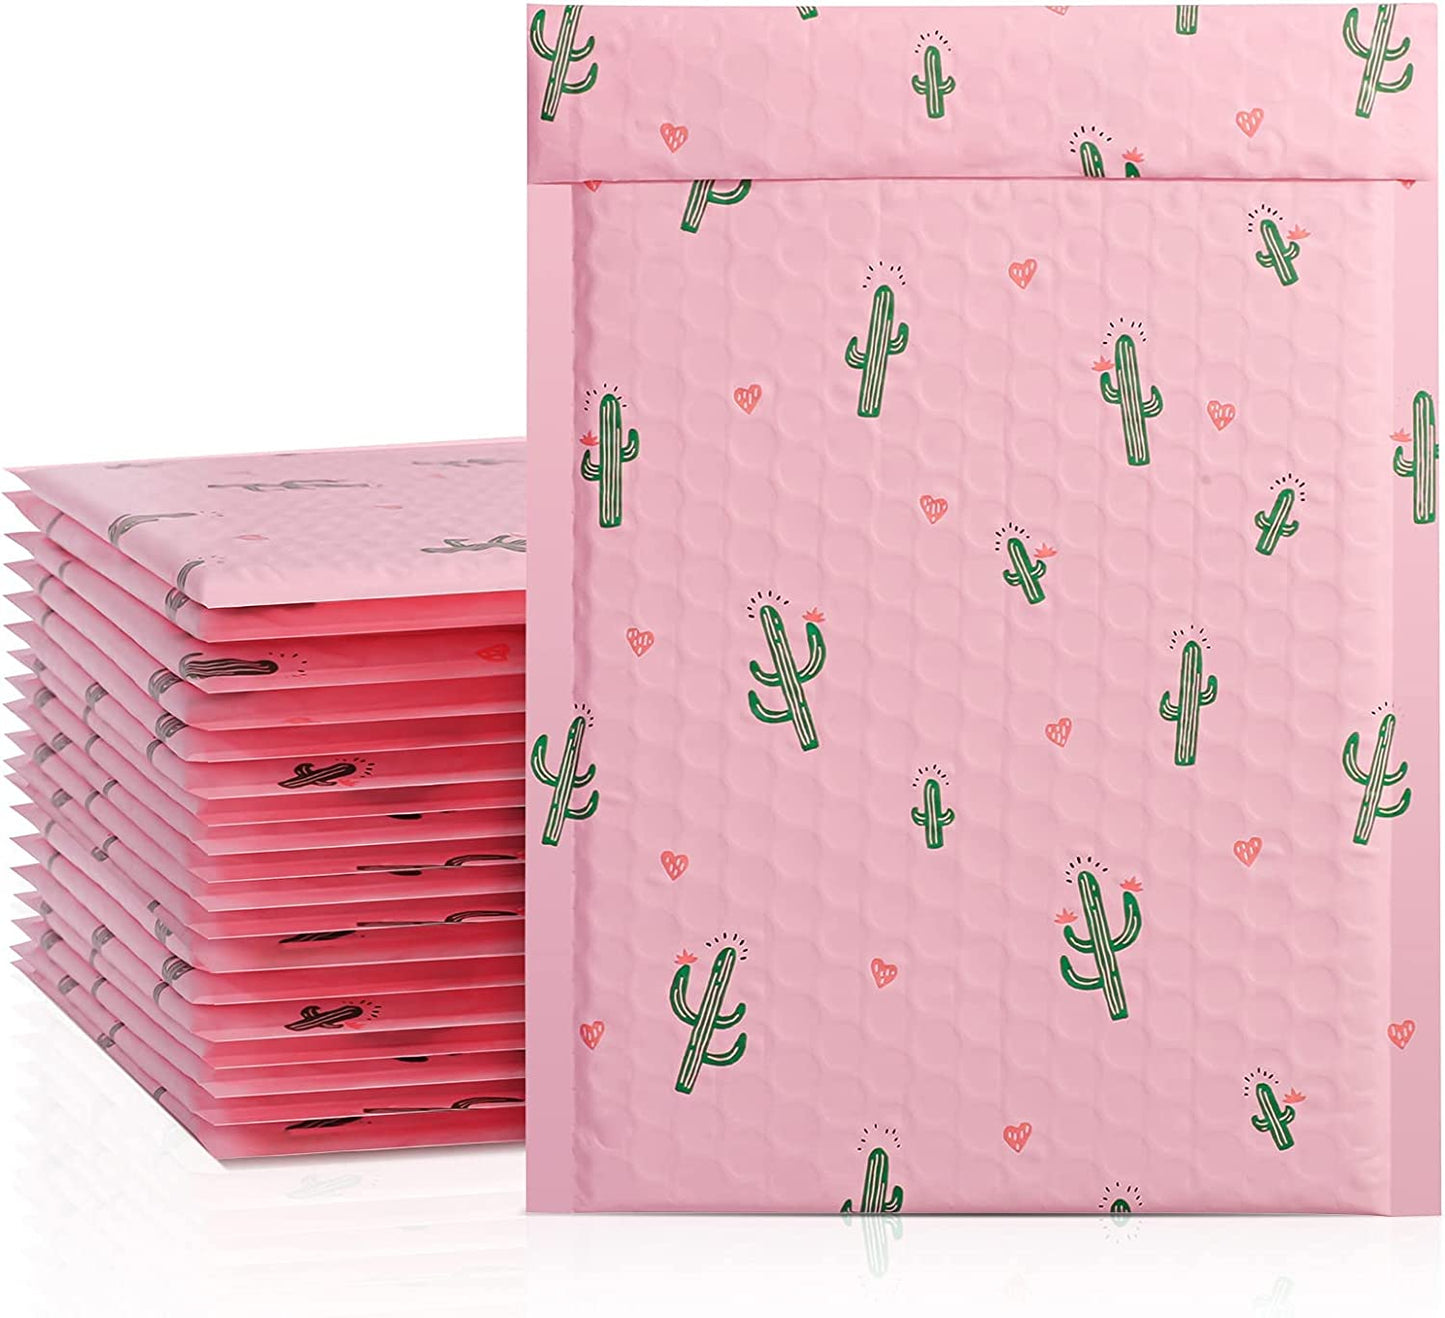 6x10 Inch Color Printing Bubble Mailers Cactus